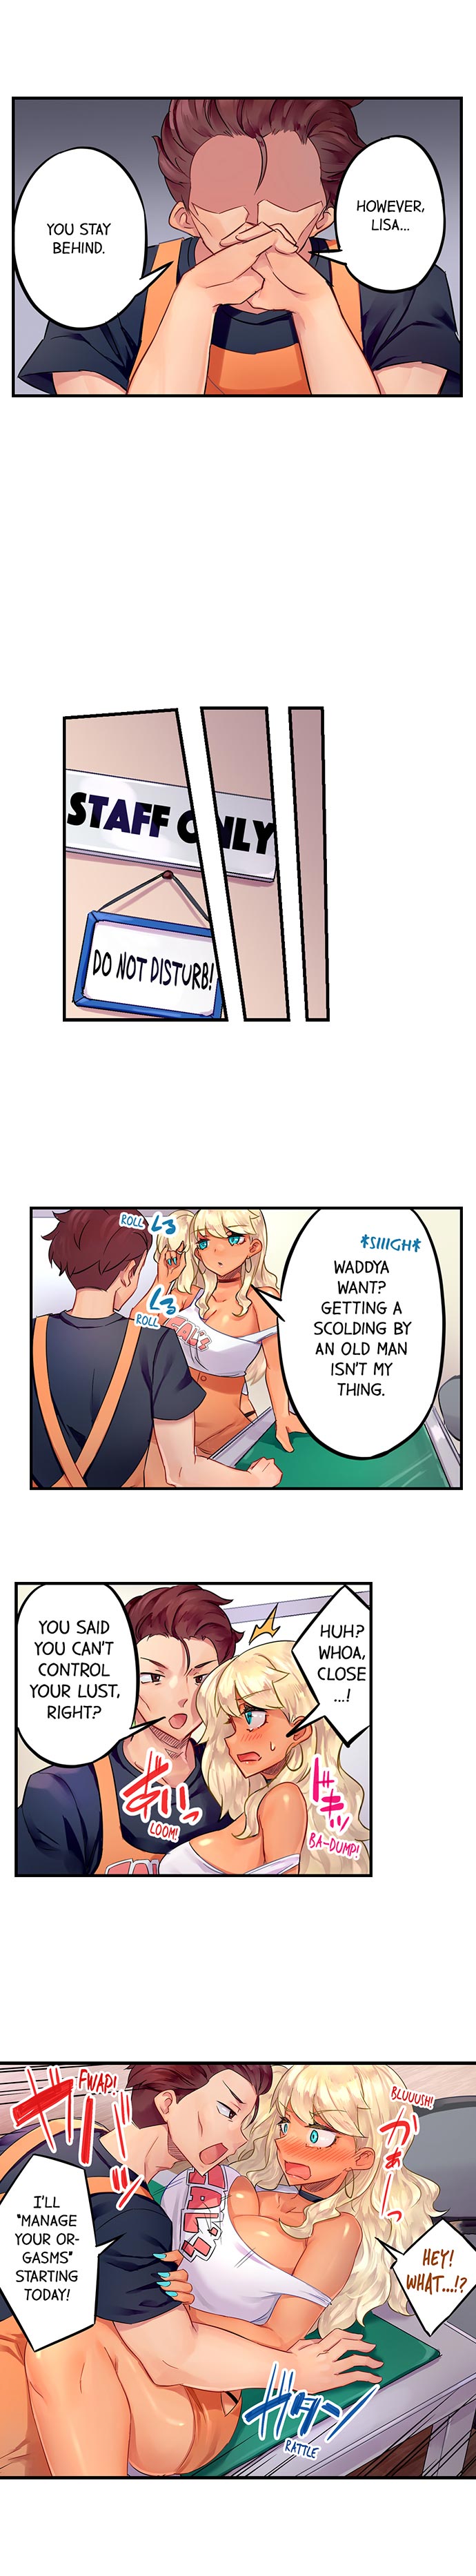 Orgasm Management for This Tanned Girl - Chapter 1 Page 9